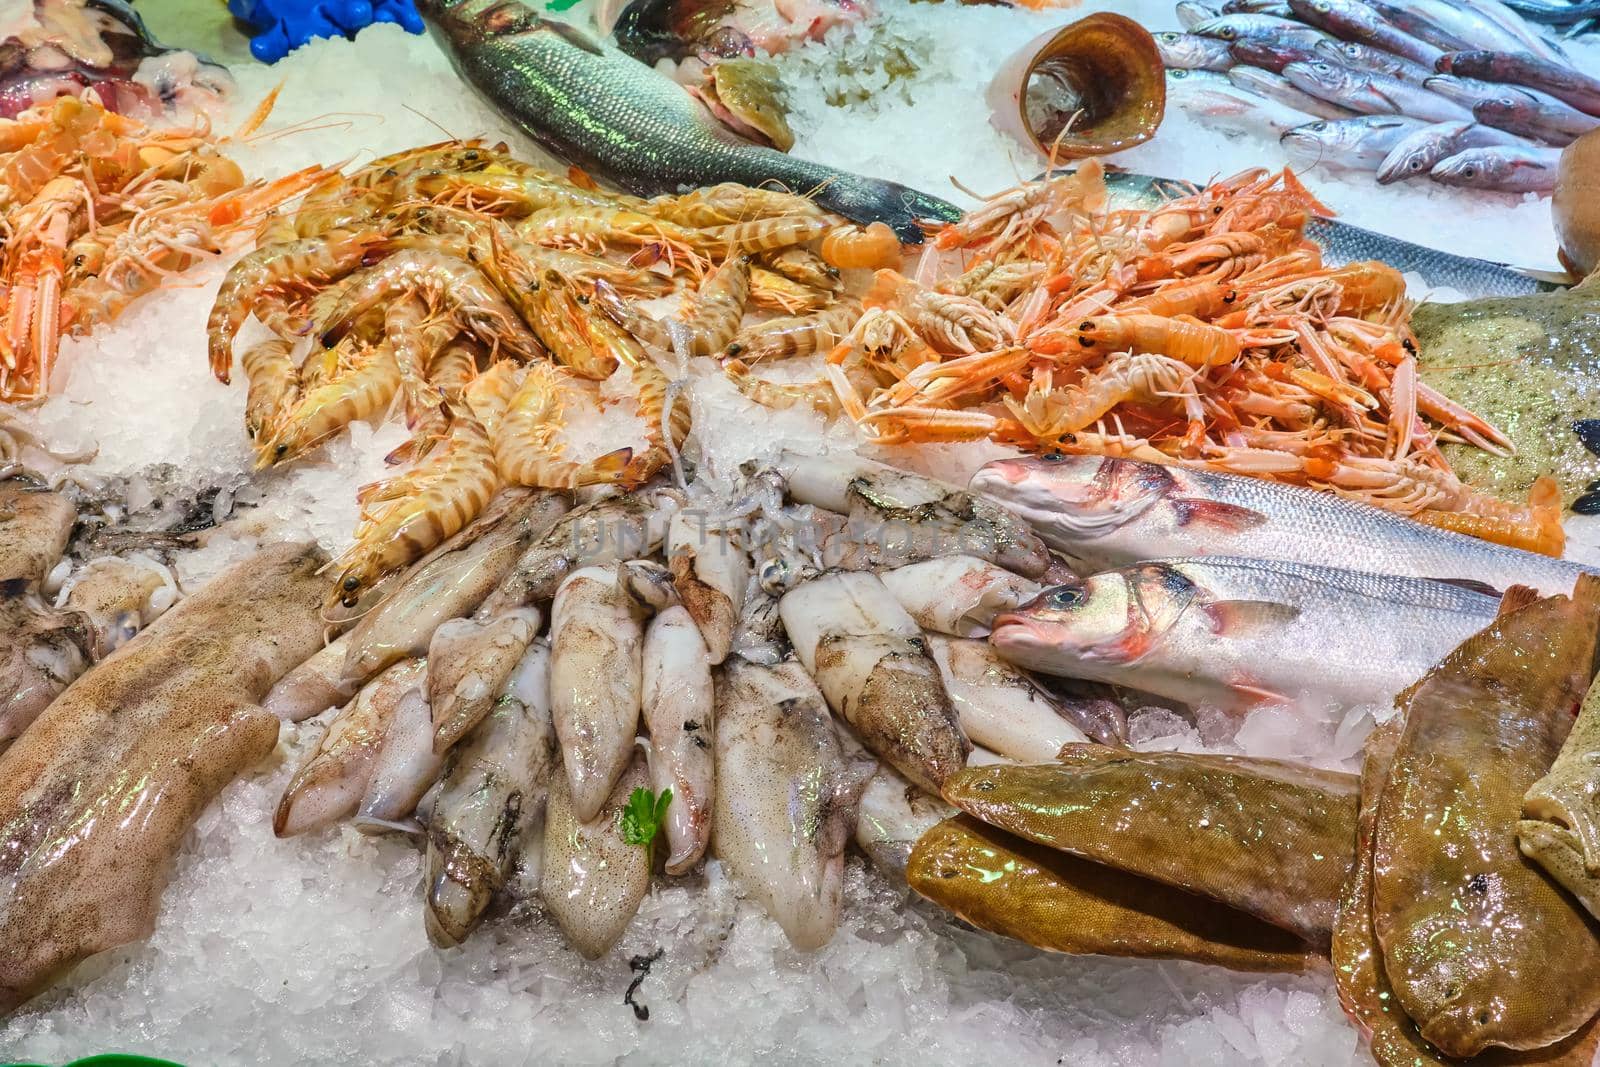 Fish, crustaceans and other seafood for sale by elxeneize